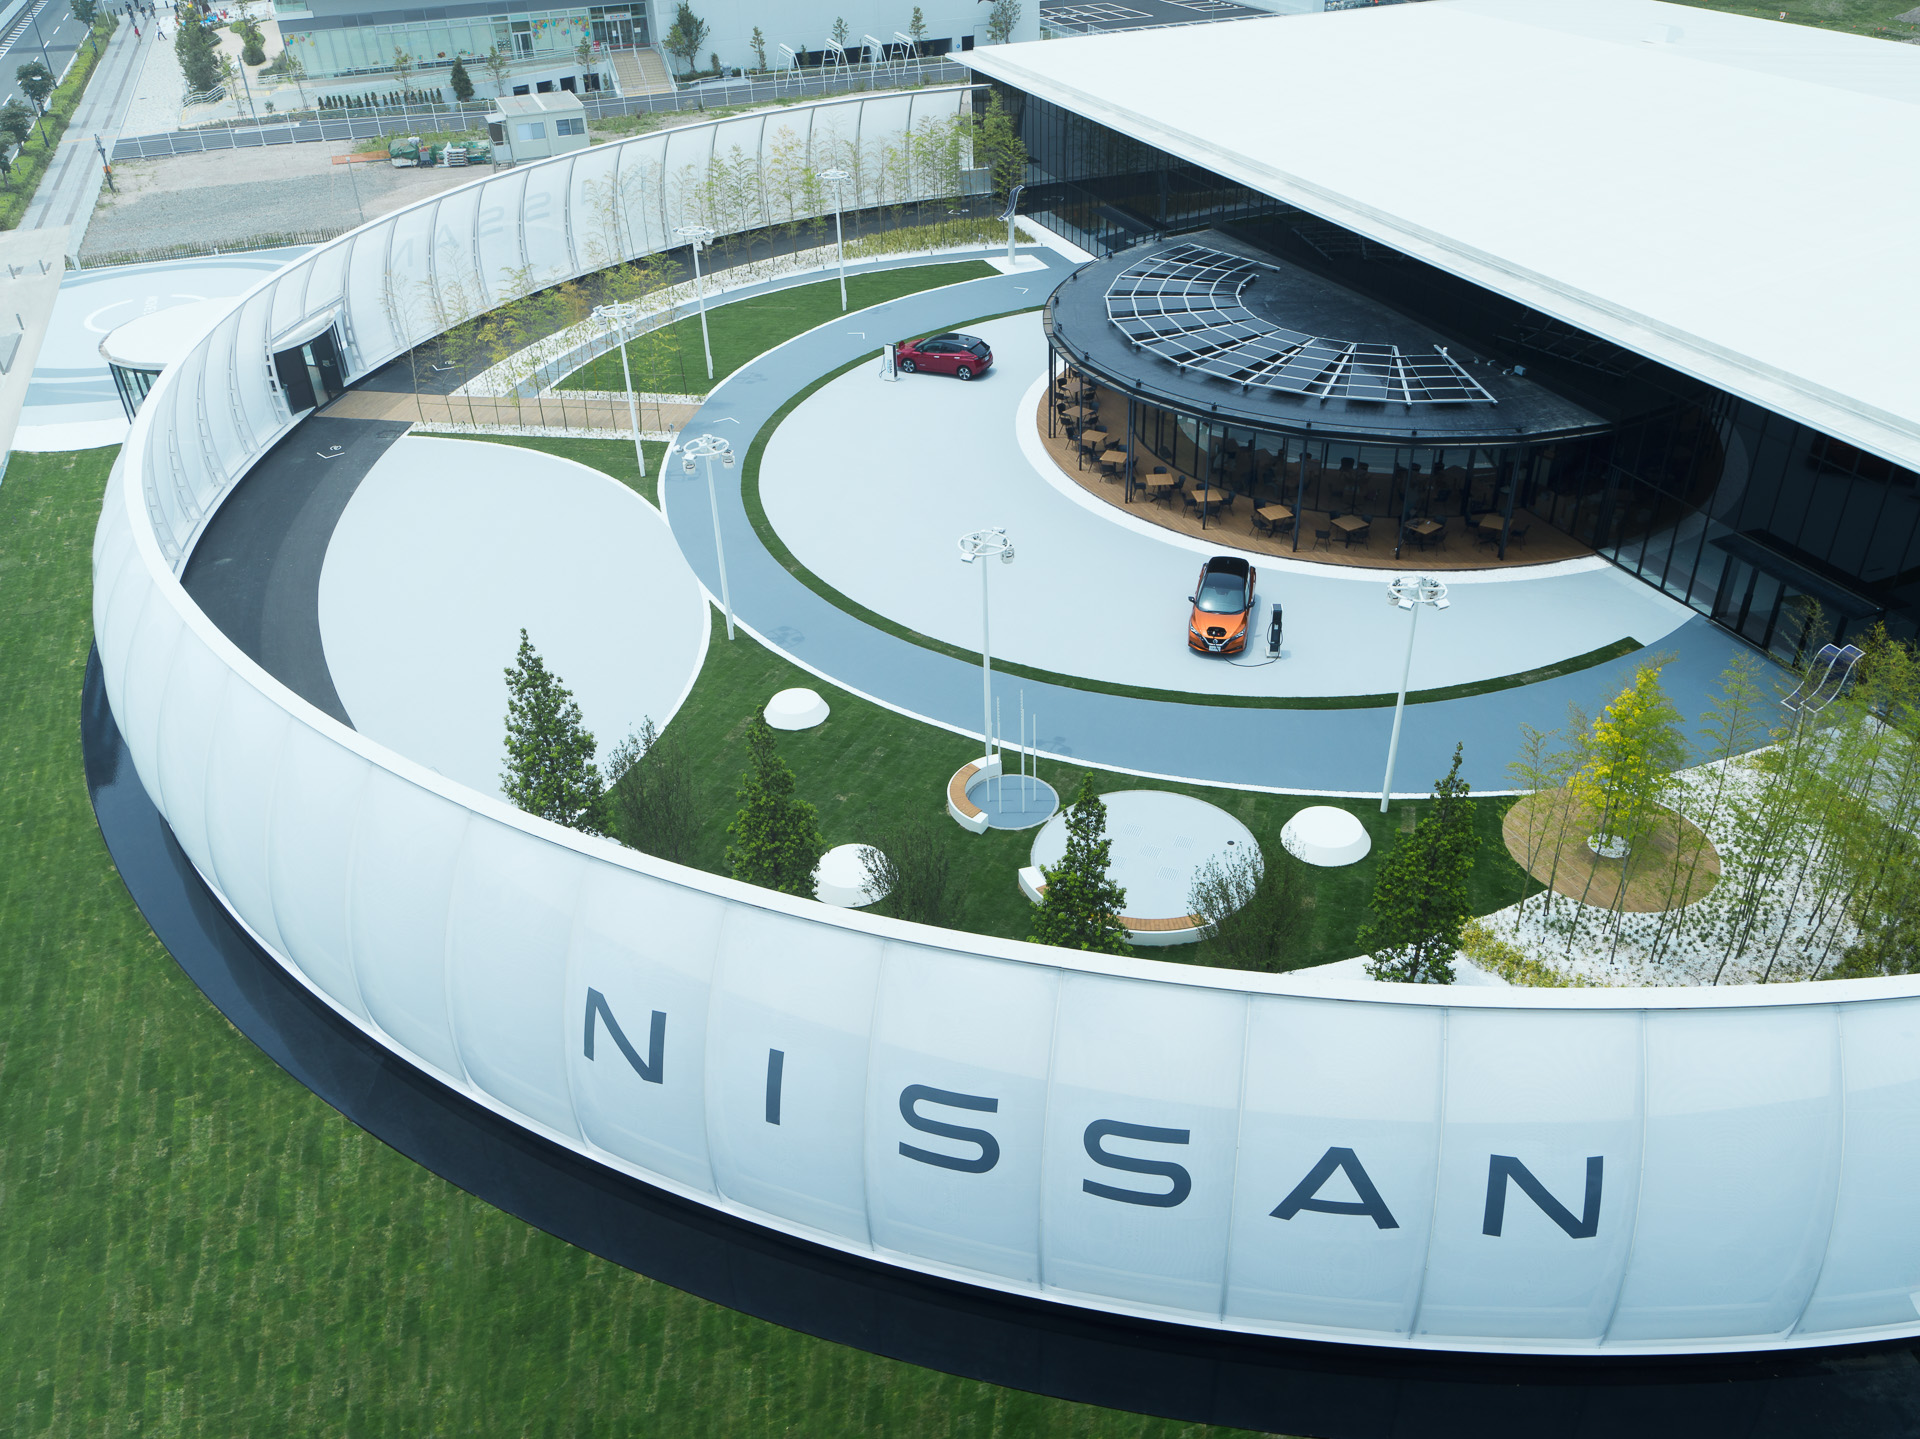 Nissan accepting electricity as payment for parking